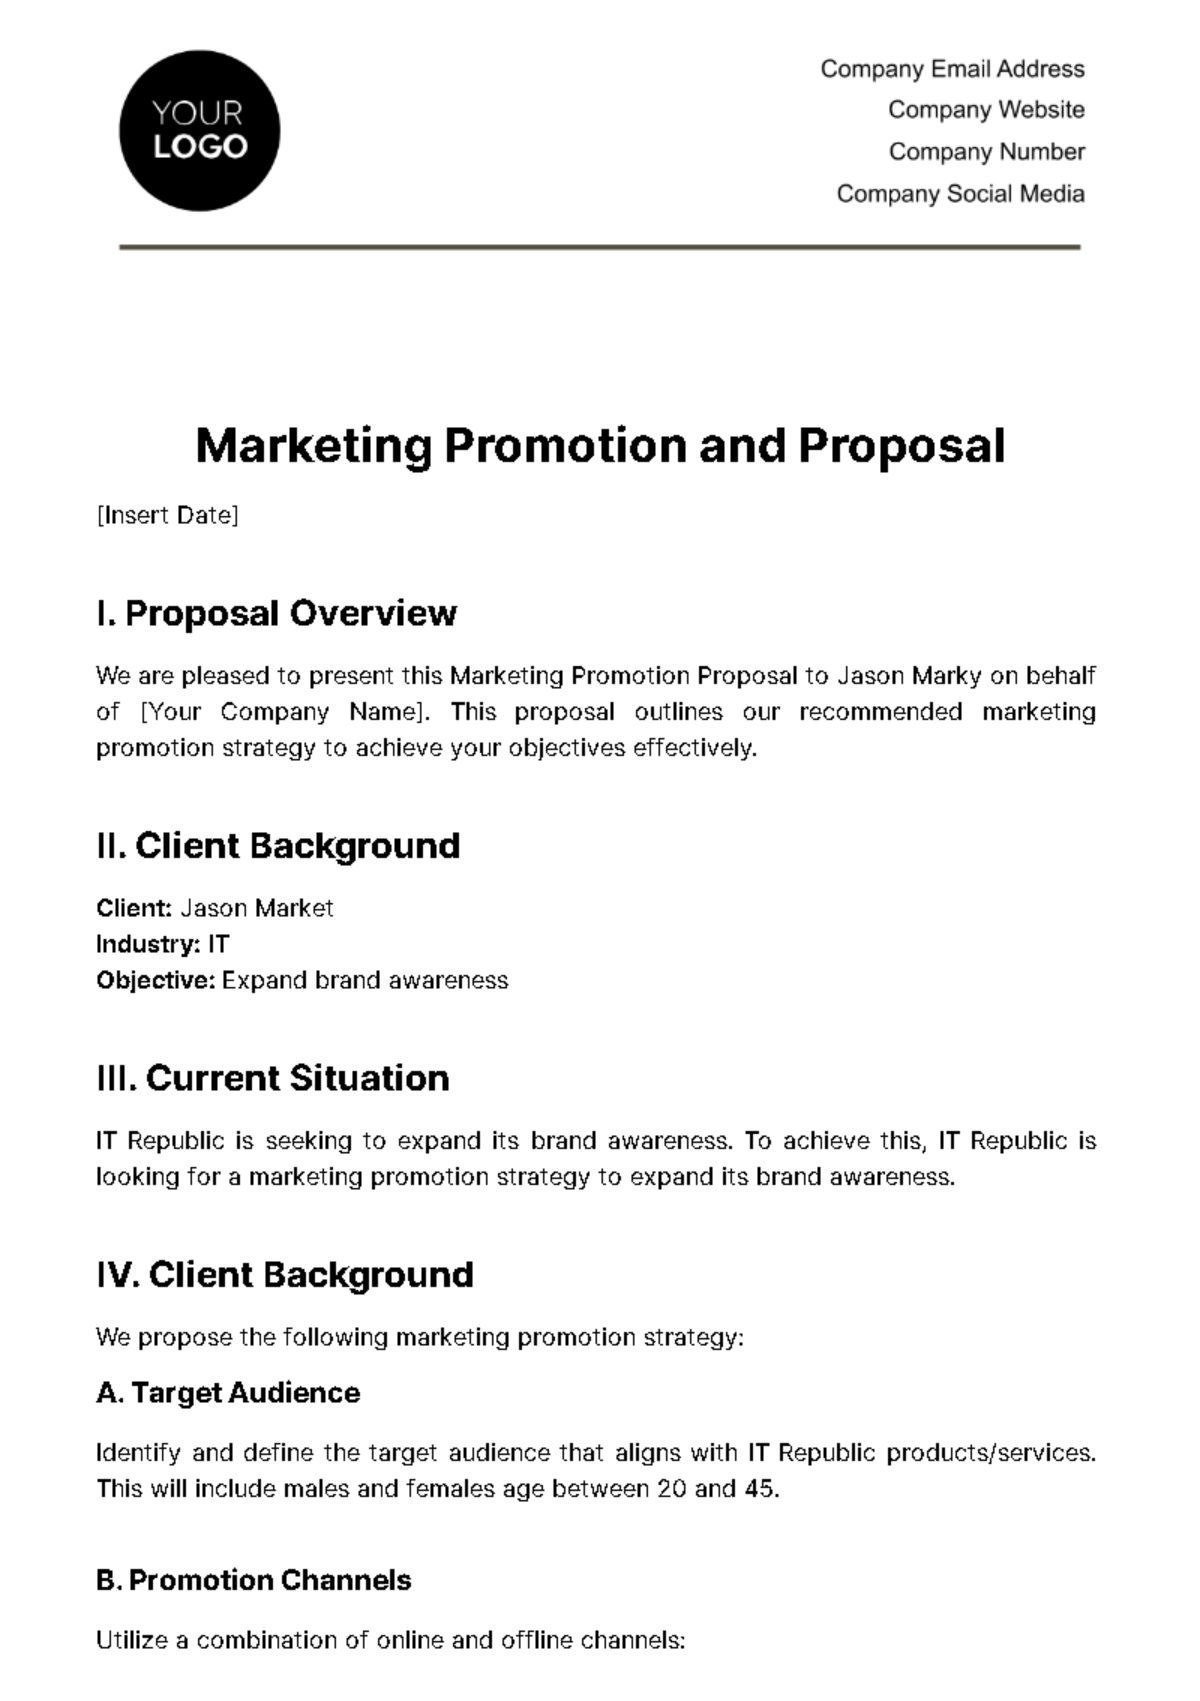 Free Marketing Promotion Proposal Template